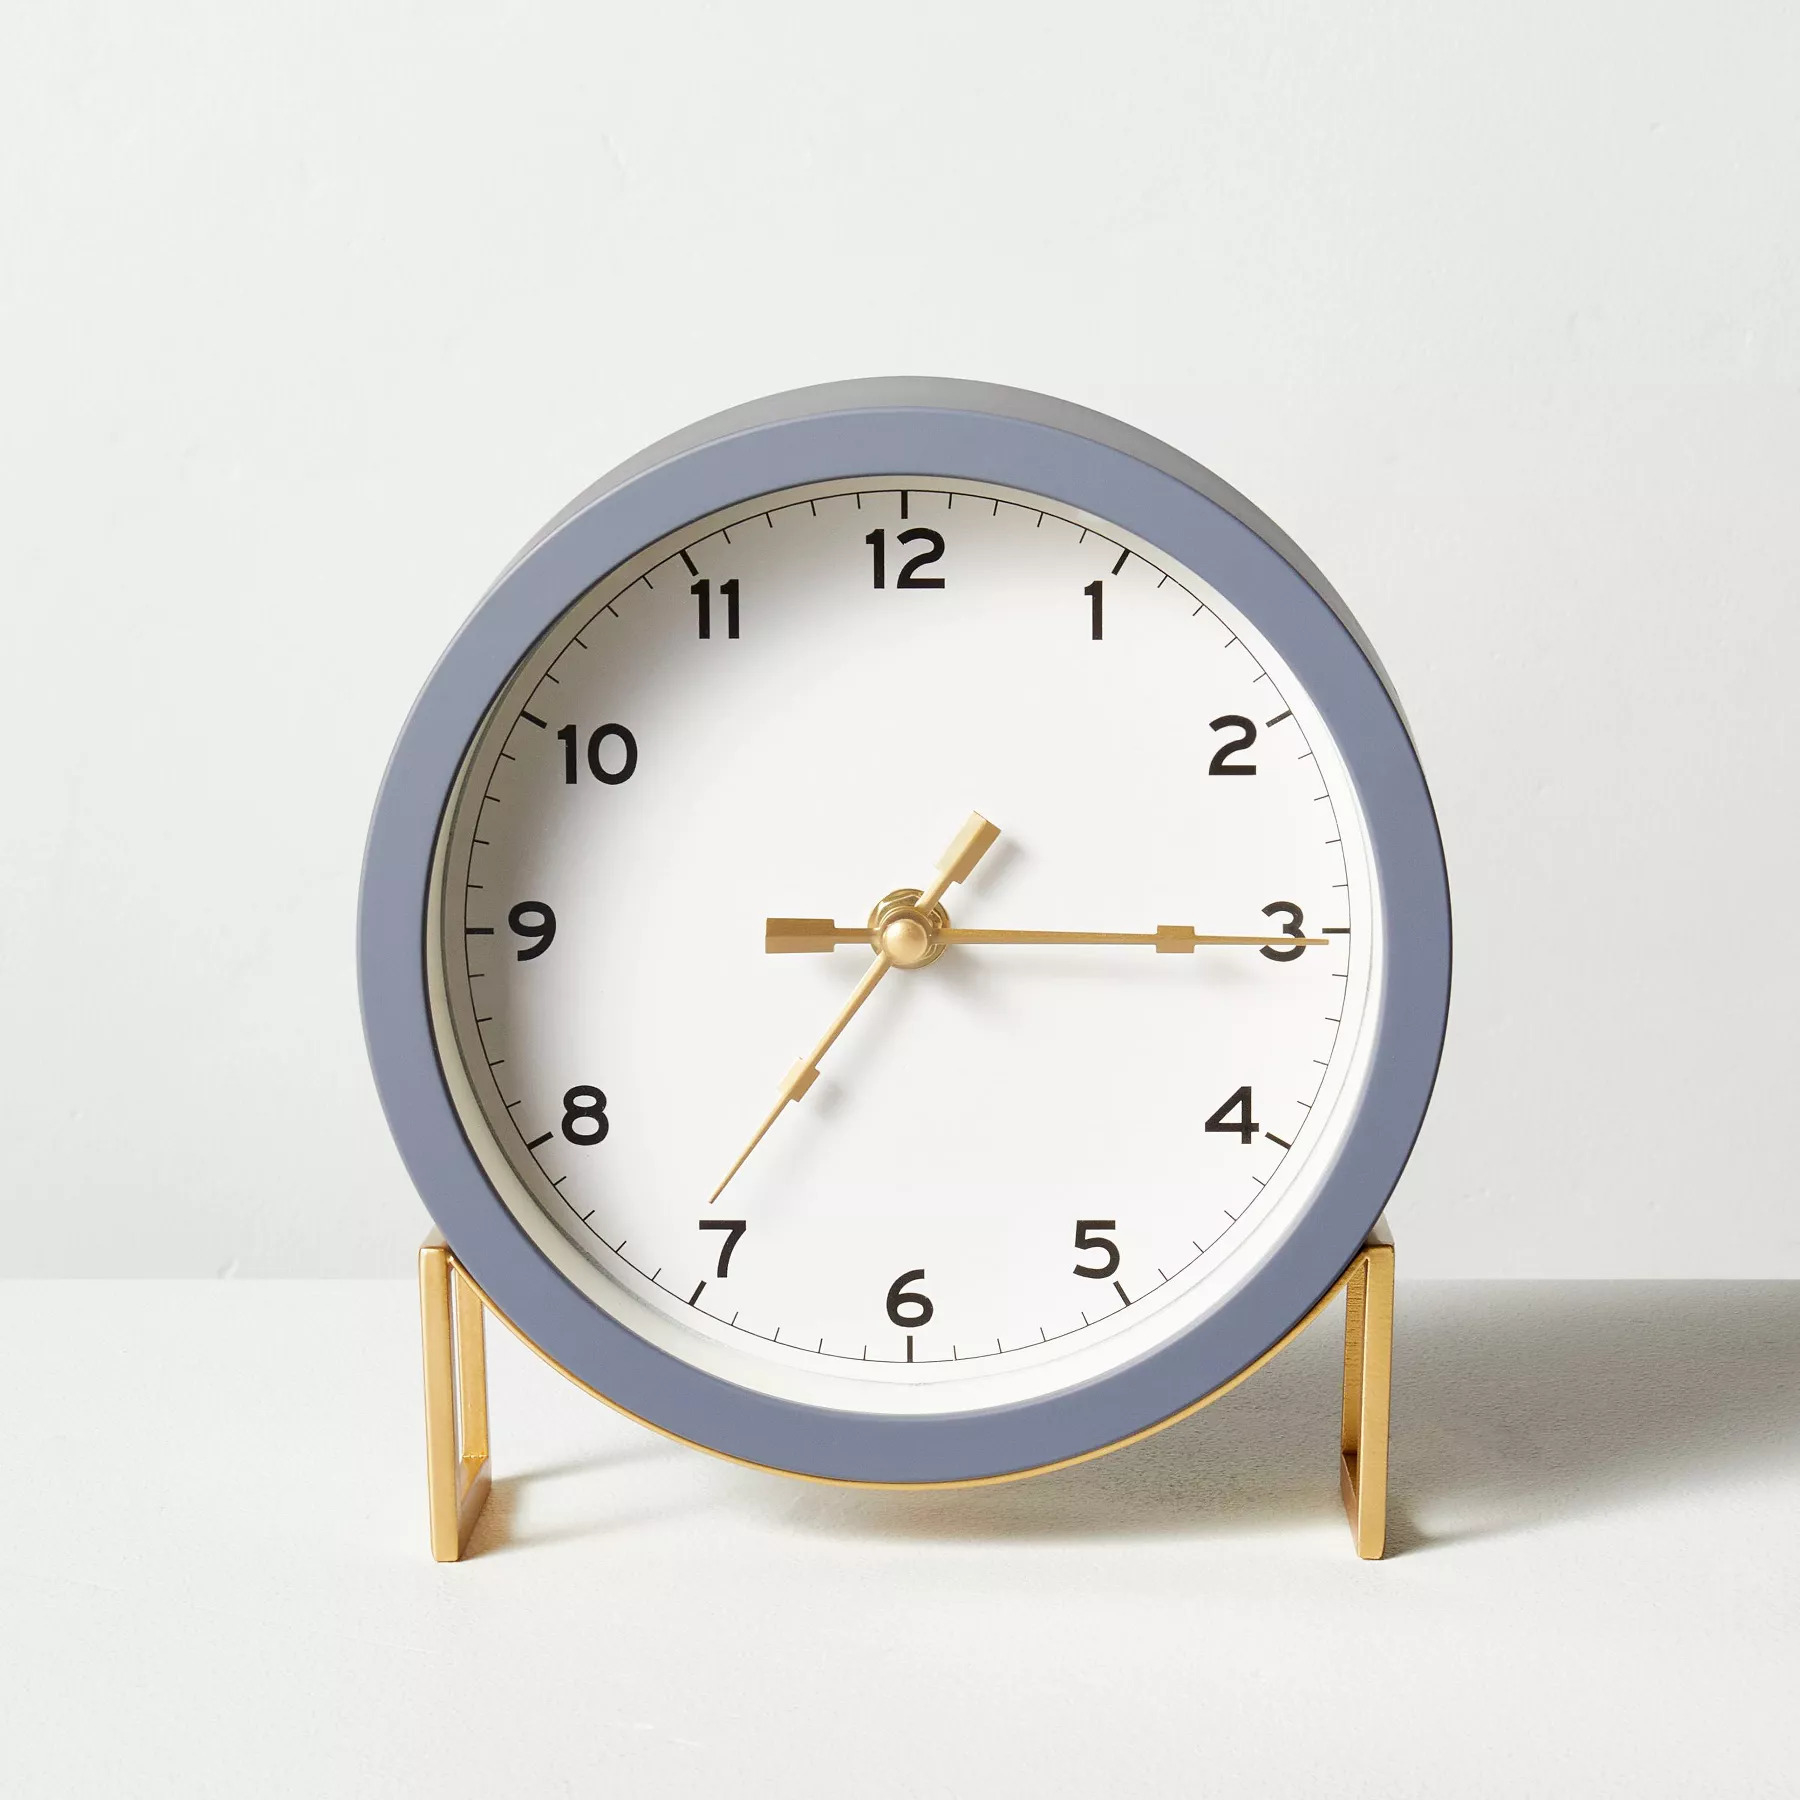 The round clock in gray and brass